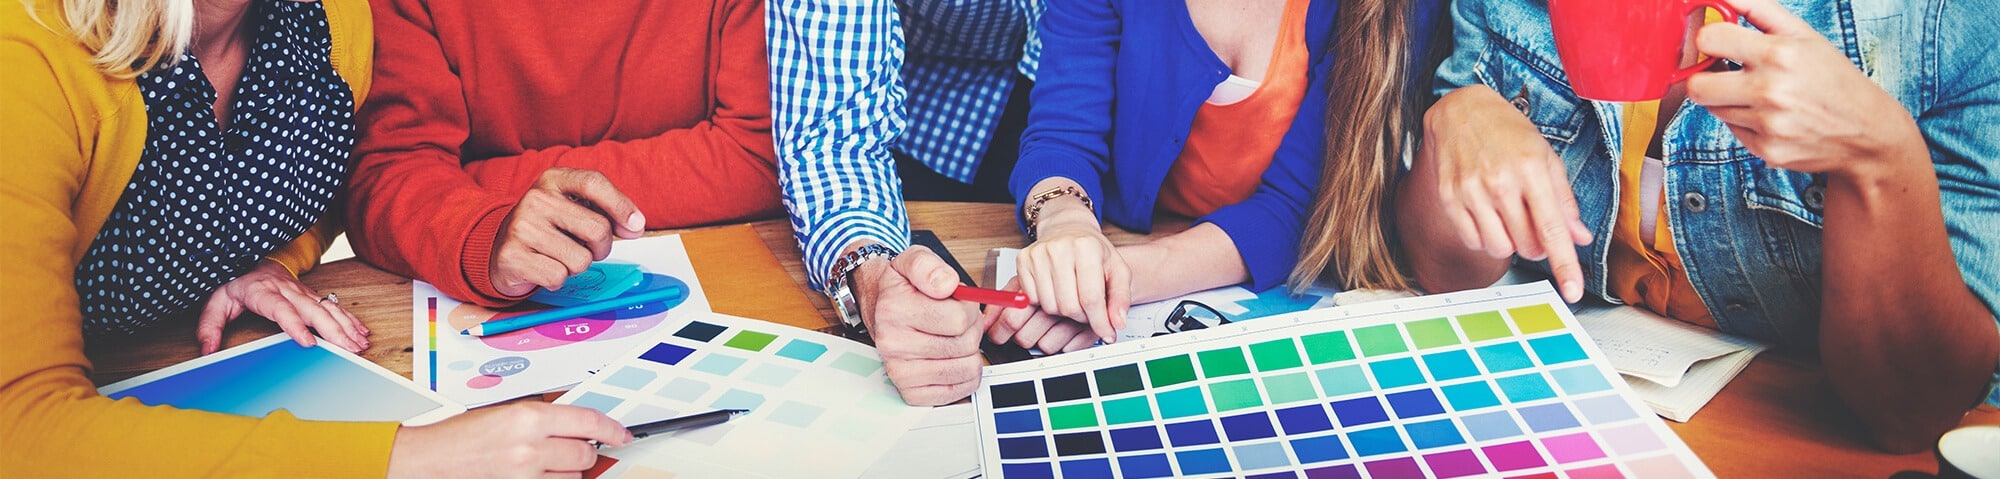 Should You Outsource Your Graphic Design Work?